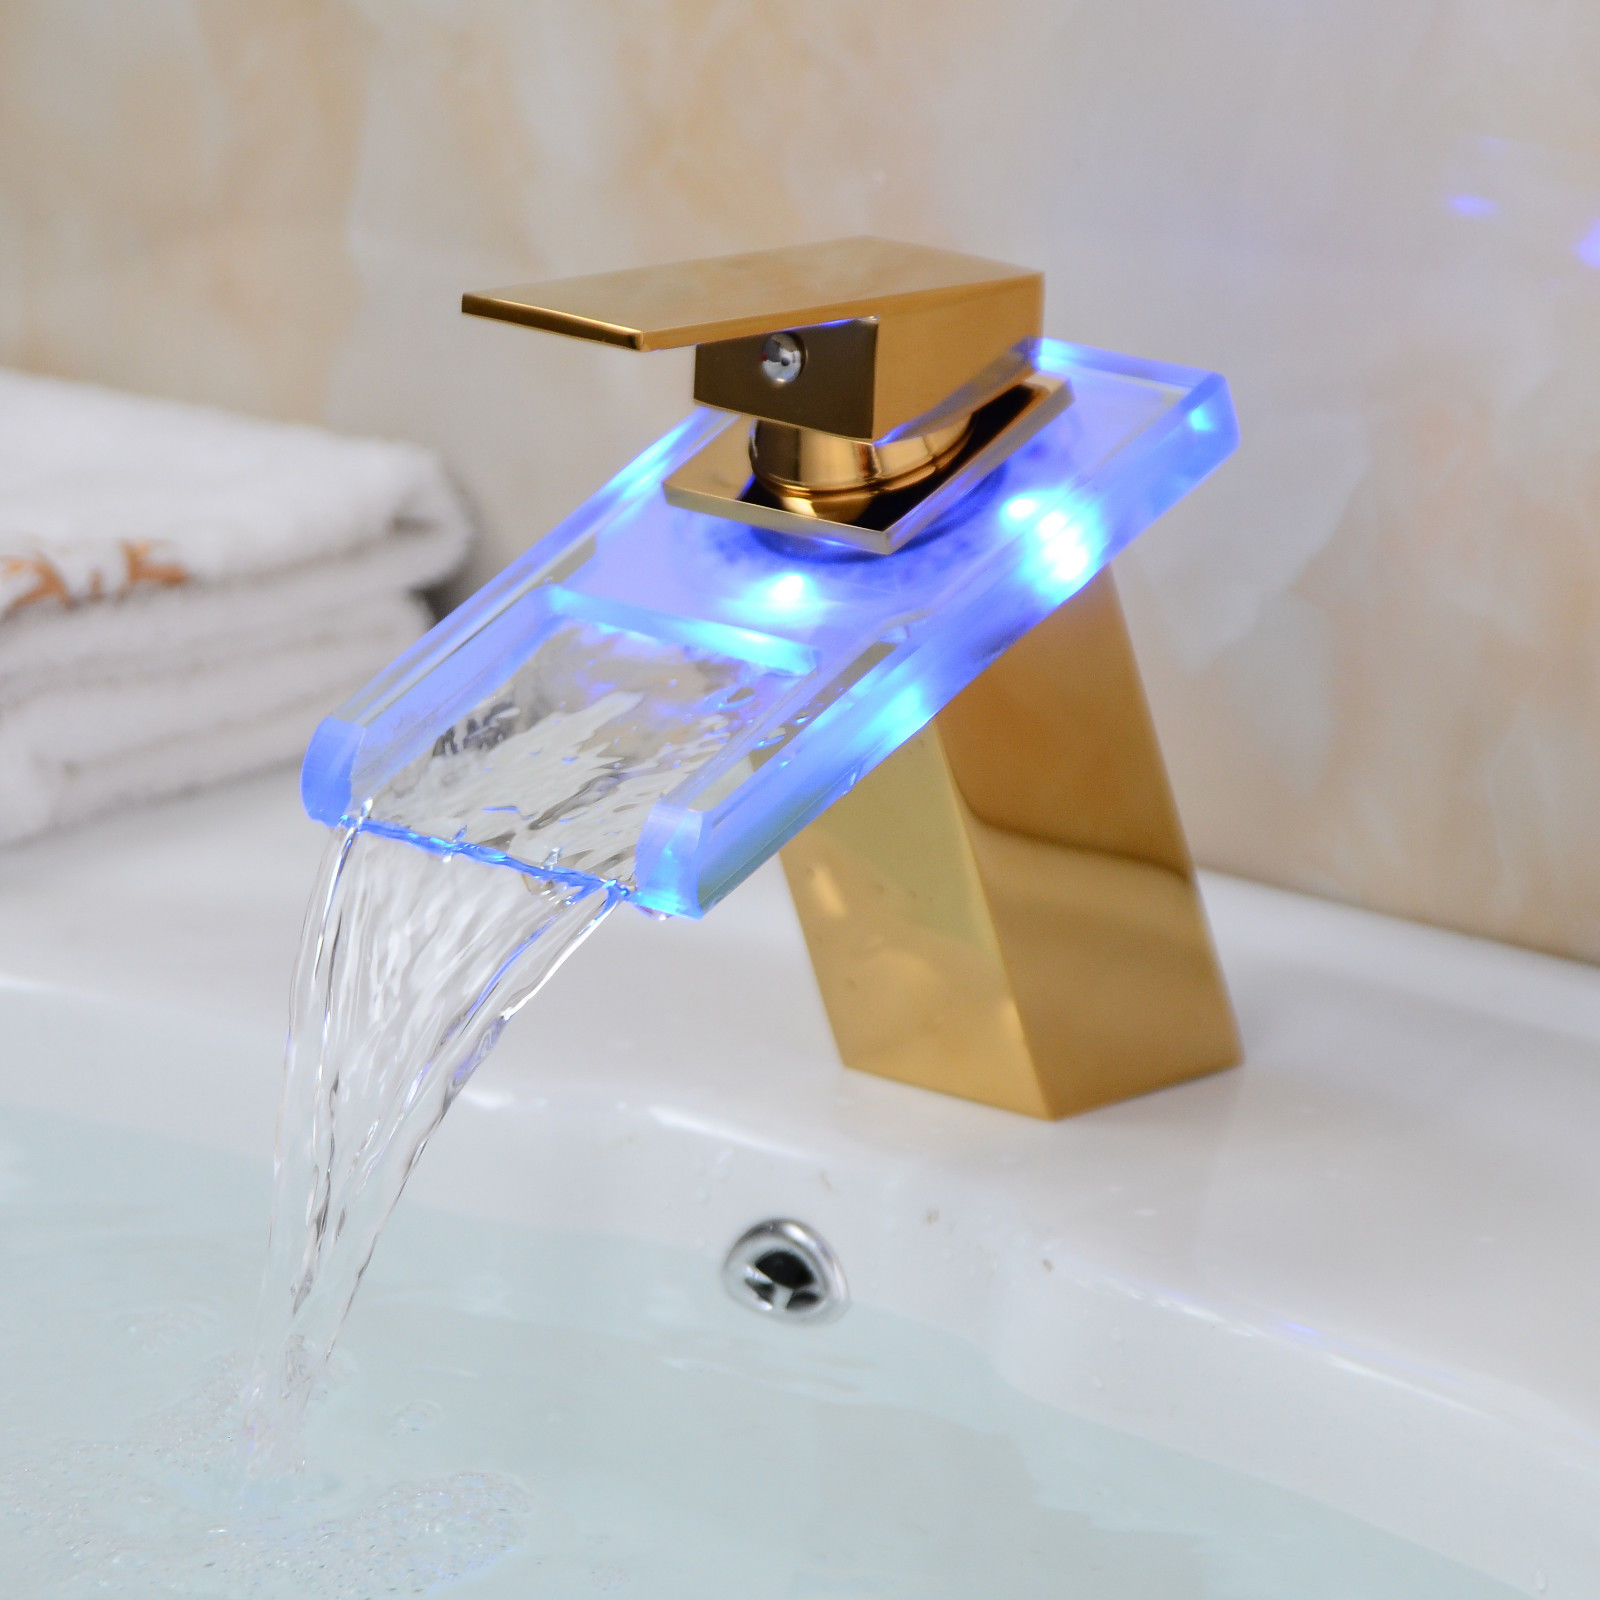 LED Bathroom Sink Faucet Waterfall Water Flow Gold  One Hole/Handle Tap 